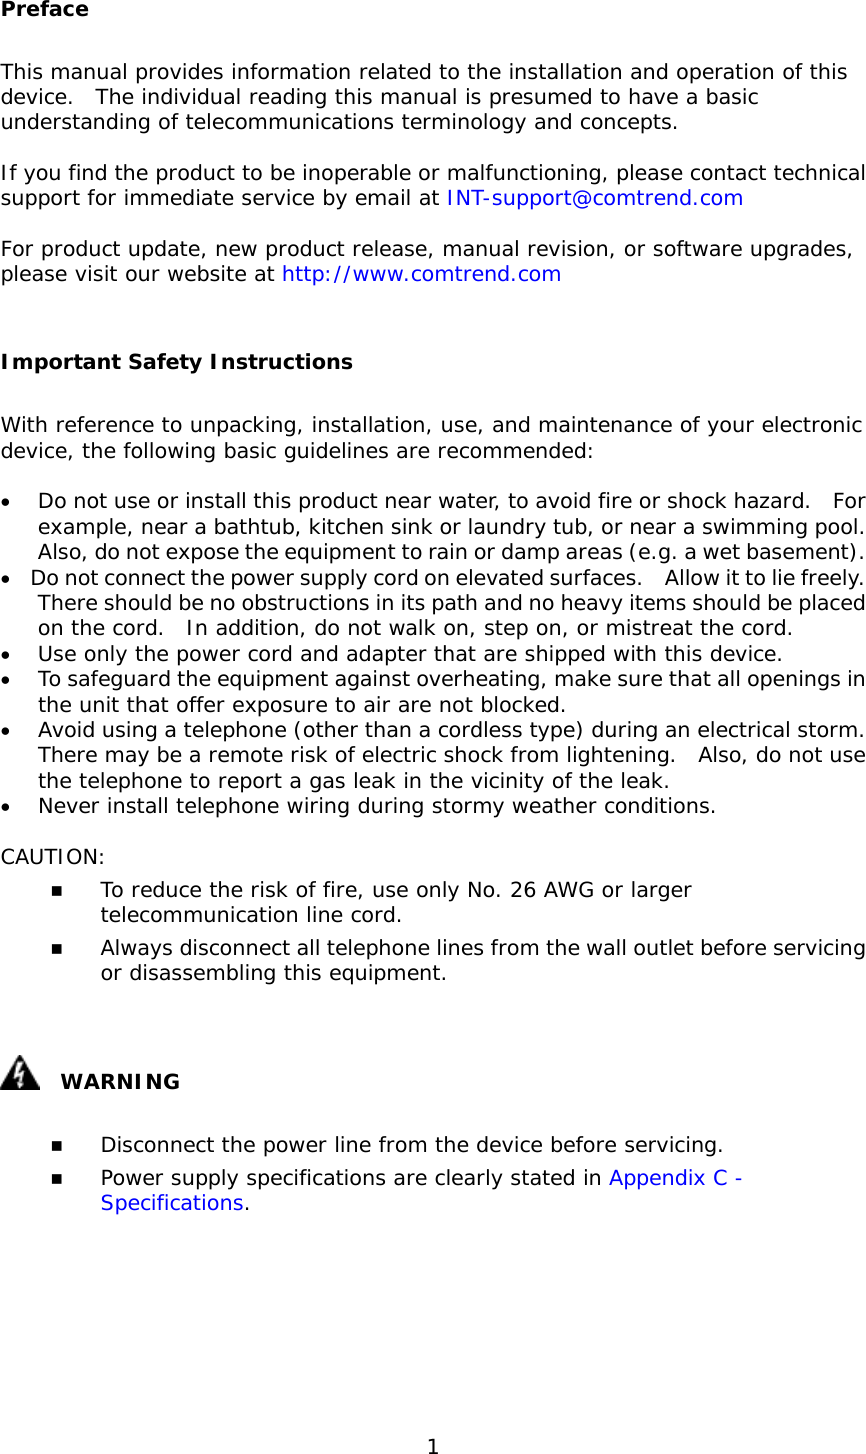  1 Preface This manual provides information related to the installation and operation of this device.  The individual reading this manual is presumed to have a basic understanding of telecommunications terminology and concepts.    If you find the product to be inoperable or malfunctioning, please contact technical support for immediate service by email at INT-support@comtrend.com  For product update, new product release, manual revision, or software upgrades, please visit our website at http://www.comtrend.com  Important Safety Instructions With reference to unpacking, installation, use, and maintenance of your electronic device, the following basic guidelines are recommended:  •  Do not use or install this product near water, to avoid fire or shock hazard.  For example, near a bathtub, kitchen sink or laundry tub, or near a swimming pool.  Also, do not expose the equipment to rain or damp areas (e.g. a wet basement). •  Do not connect the power supply cord on elevated surfaces.    Allow it to lie freely.   There should be no obstructions in its path and no heavy items should be placed on the cord.  In addition, do not walk on, step on, or mistreat the cord. •  Use only the power cord and adapter that are shipped with this device. •  To safeguard the equipment against overheating, make sure that all openings in the unit that offer exposure to air are not blocked. •  Avoid using a telephone (other than a cordless type) during an electrical storm.  There may be a remote risk of electric shock from lightening.  Also, do not use the telephone to report a gas leak in the vicinity of the leak. •  Never install telephone wiring during stormy weather conditions.  CAUTION:   To reduce the risk of fire, use only No. 26 AWG or larger telecommunication line cord.   Always disconnect all telephone lines from the wall outlet before servicing or disassembling this equipment.    WARNING   Disconnect the power line from the device before servicing.    Power supply specifications are clearly stated in Appendix C - Specifications.       